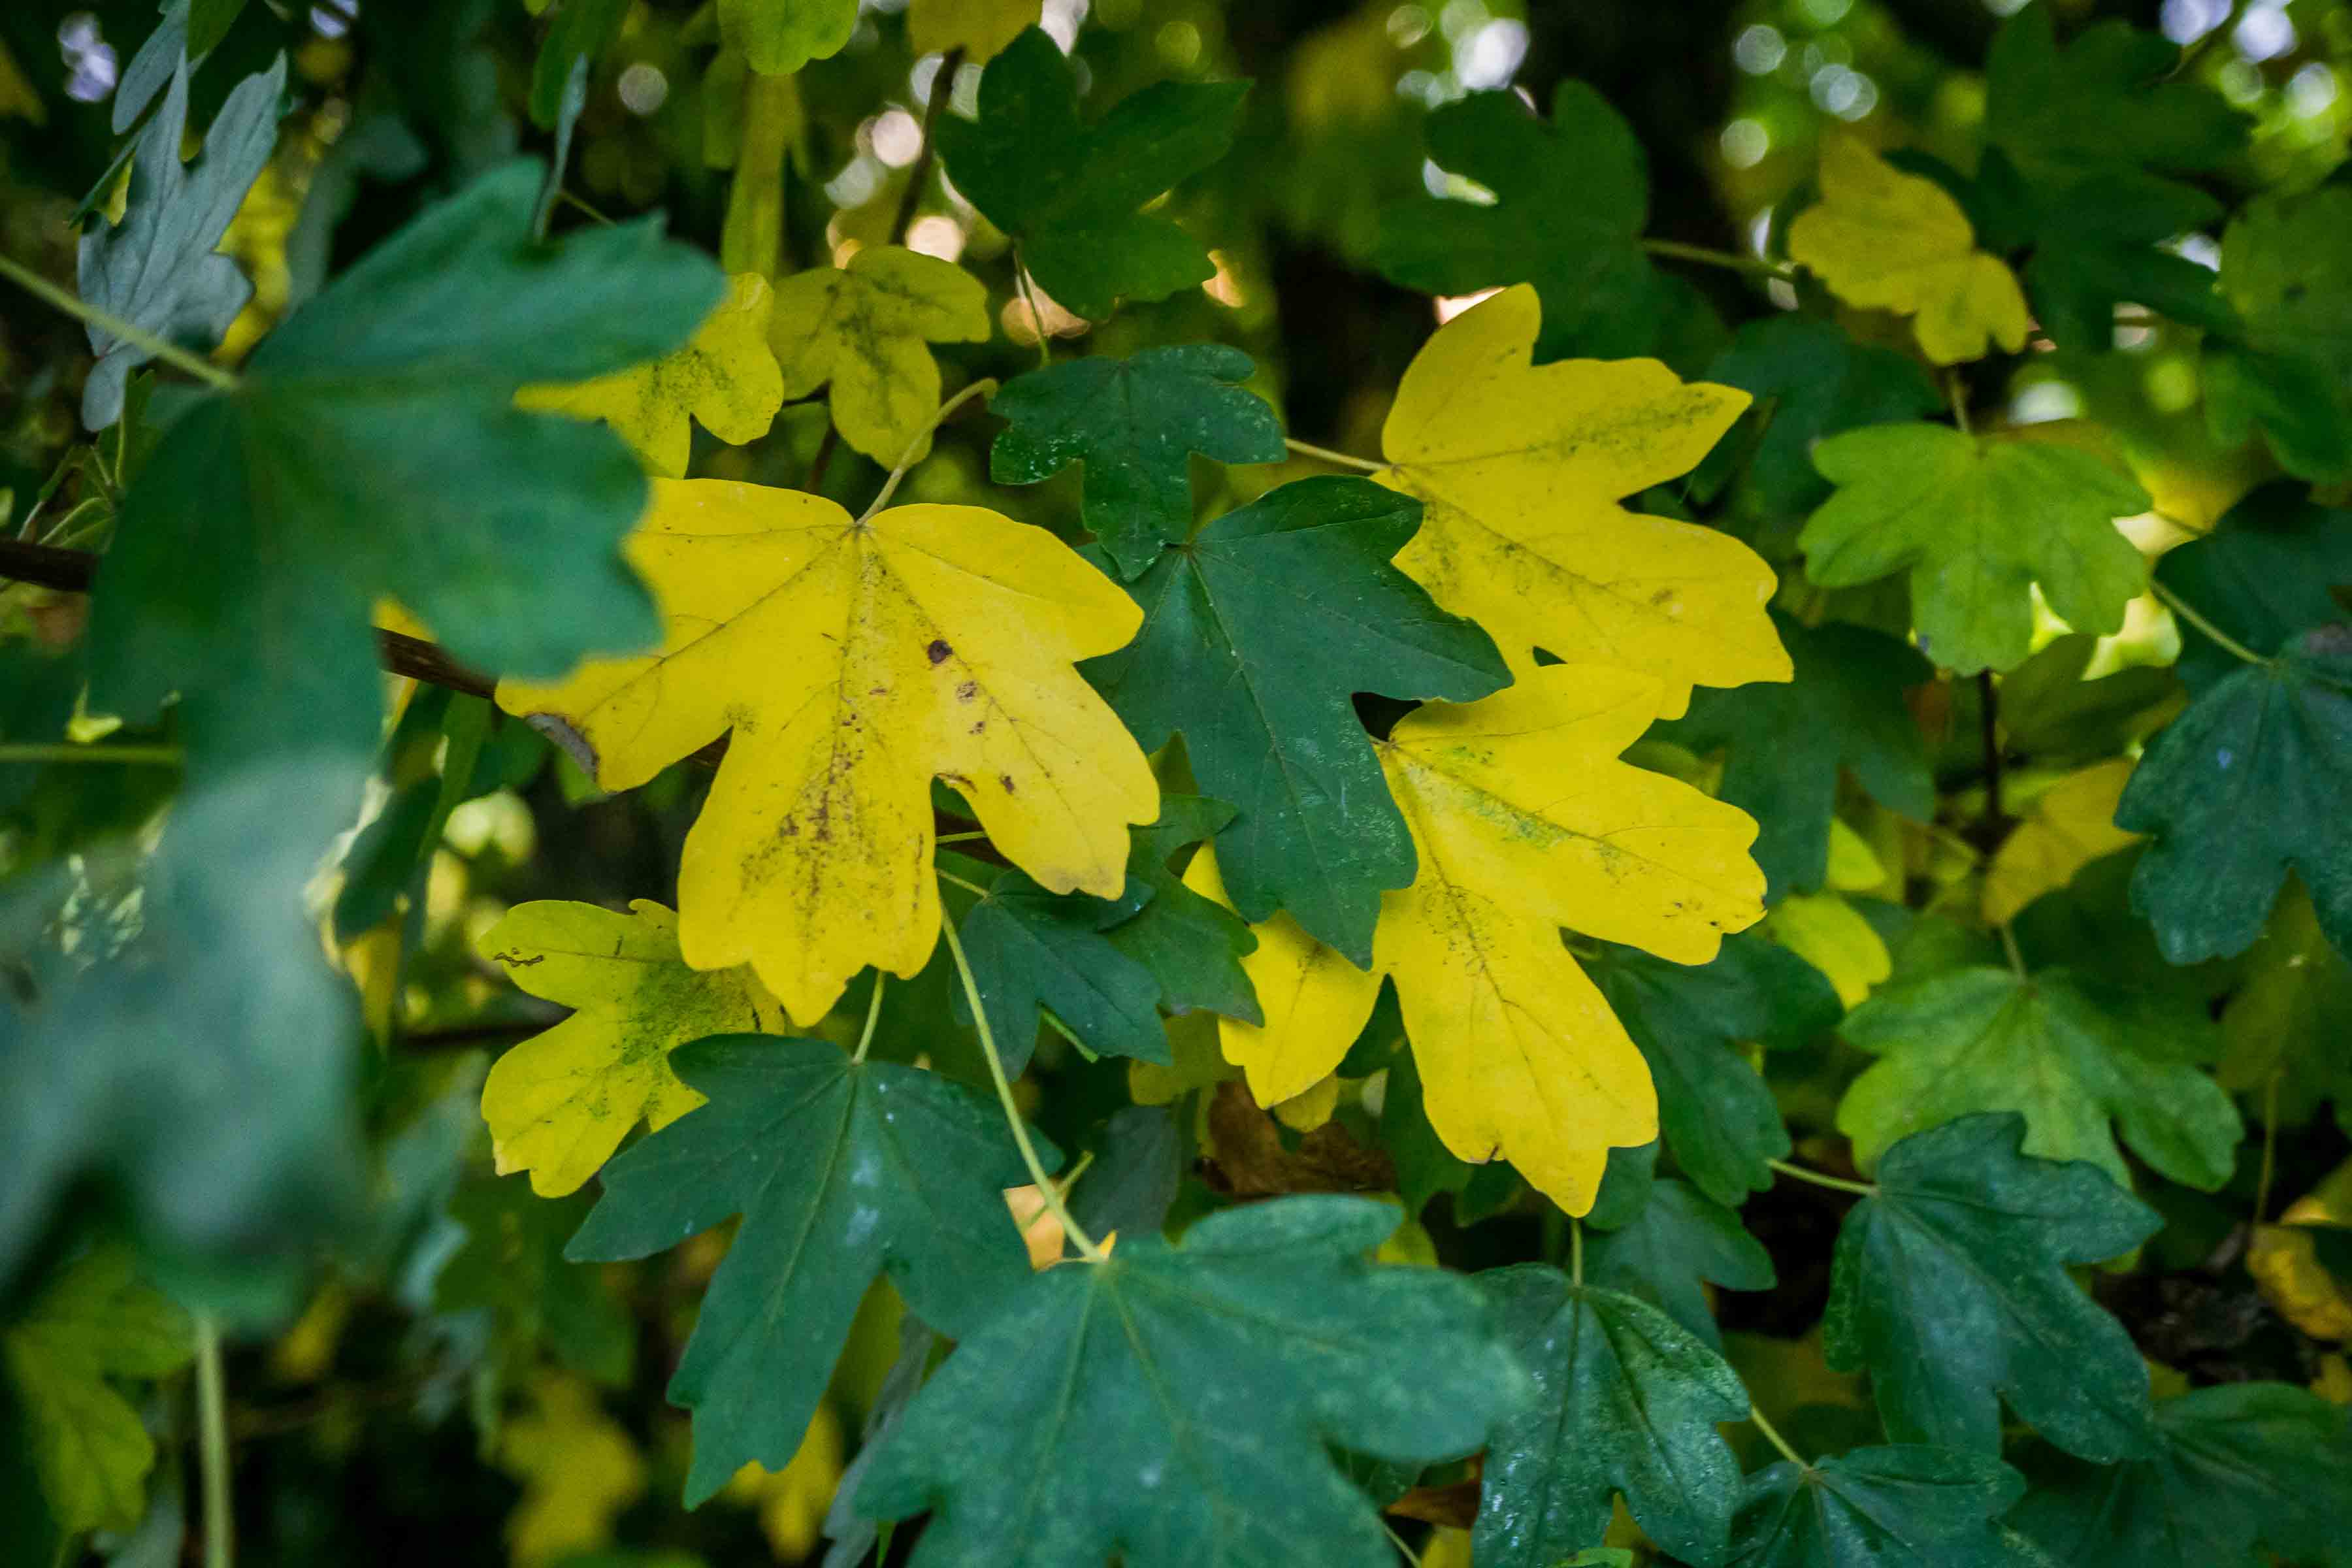 Field maple leaves turning from green to yellow